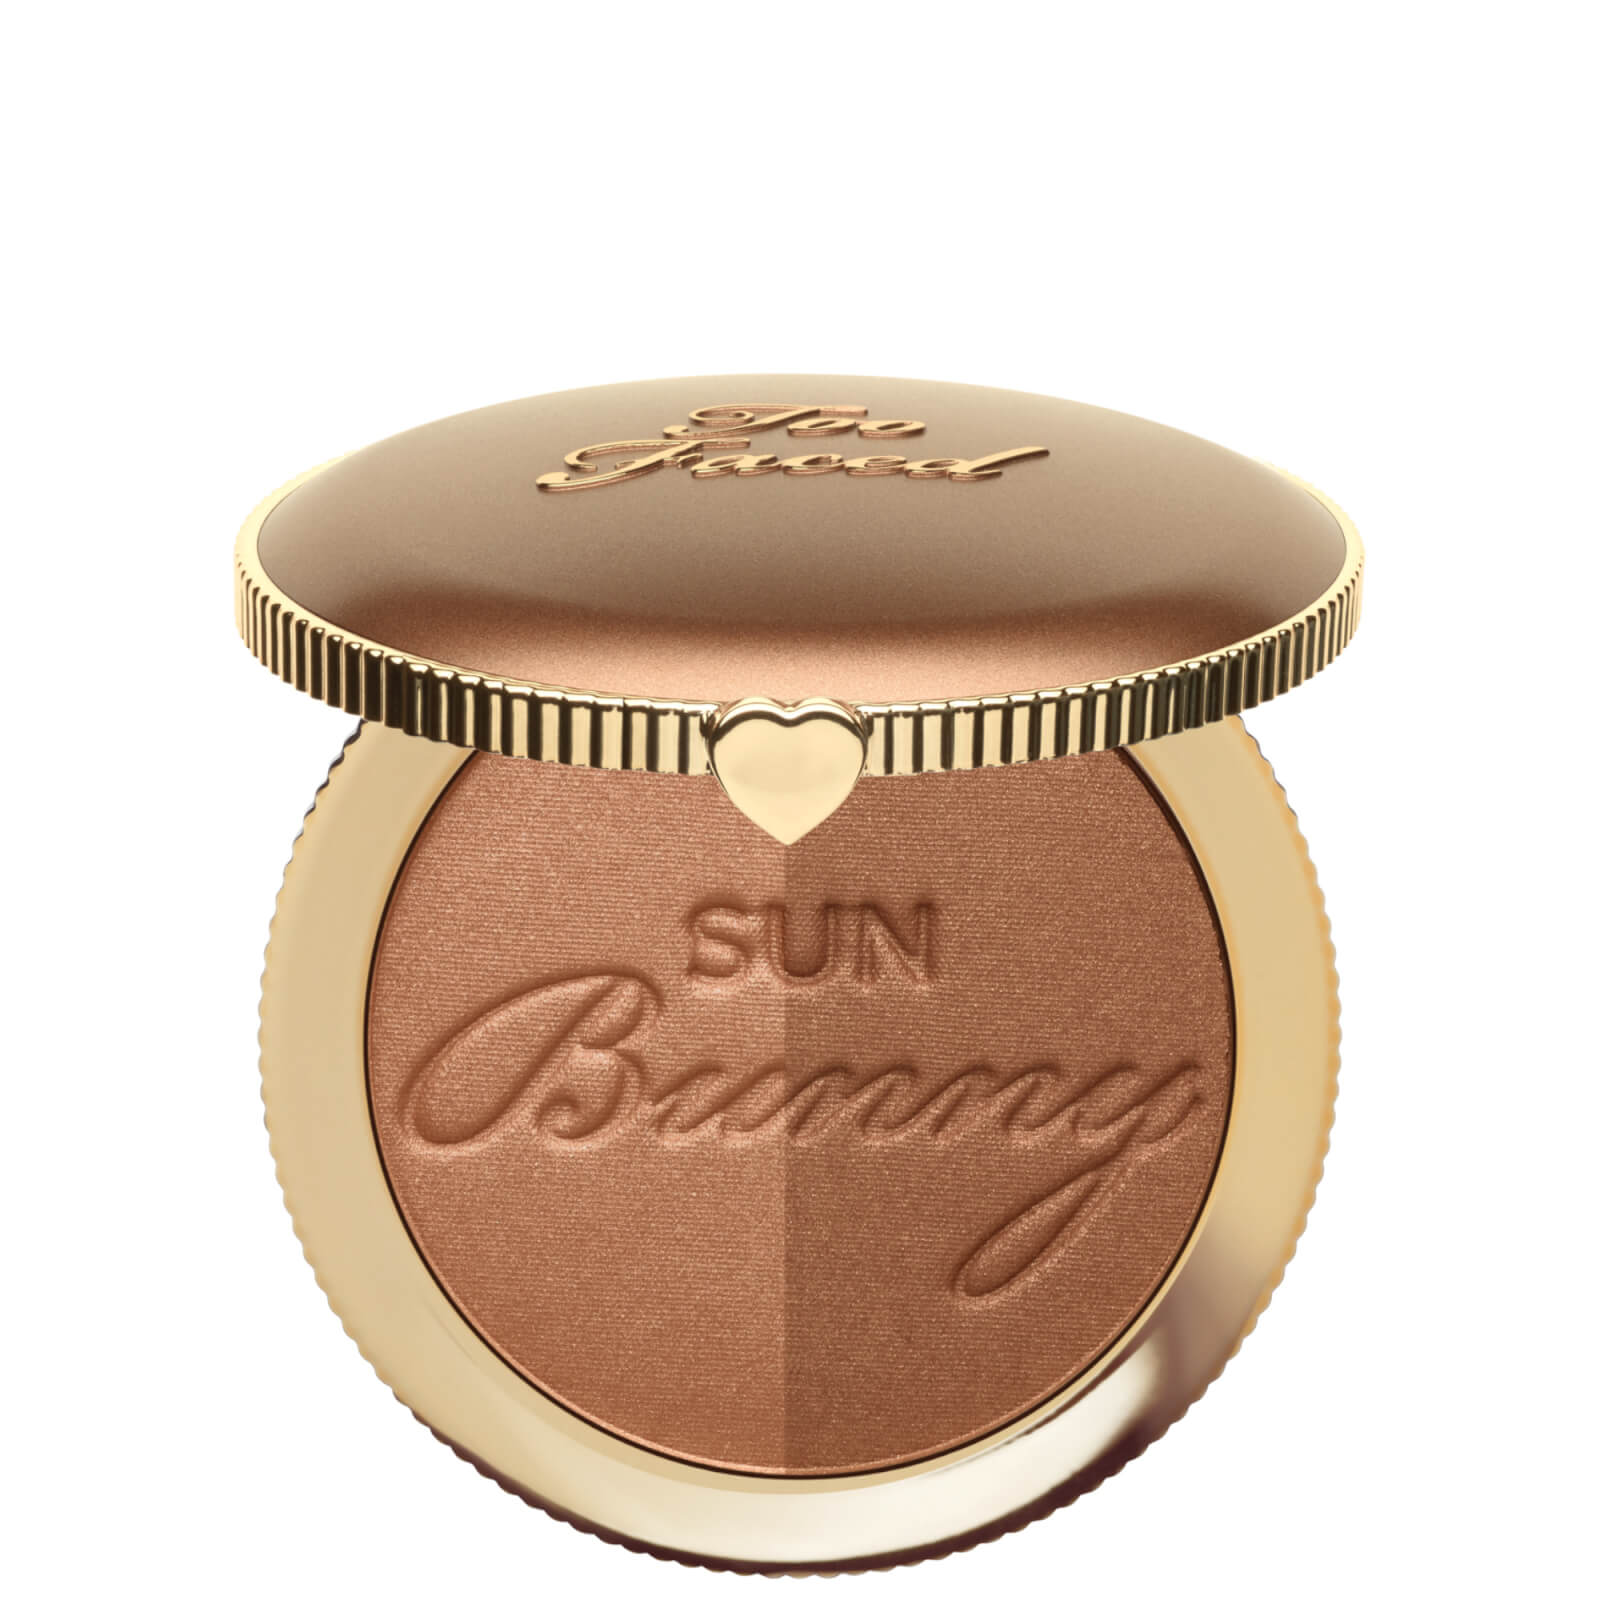 Image of Too Faced Natural Bronzer - Sun Bunny 8g